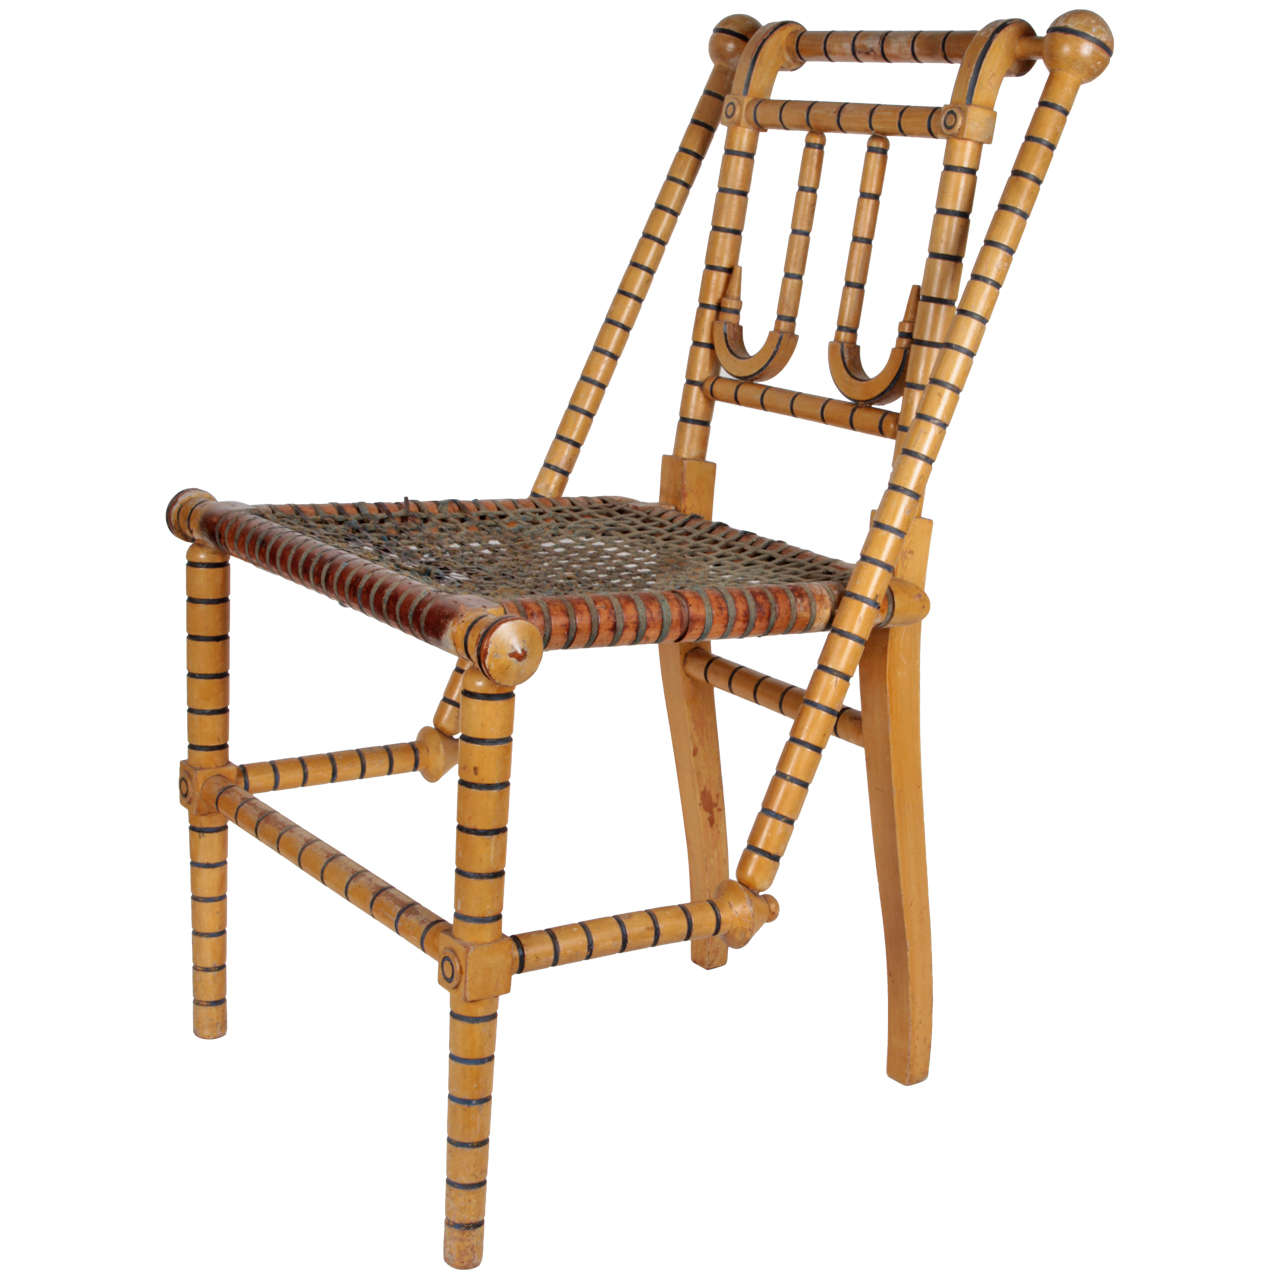 George Jakob Hunzinger New York 19th Century Rare Painted Chair 1876 For Sale